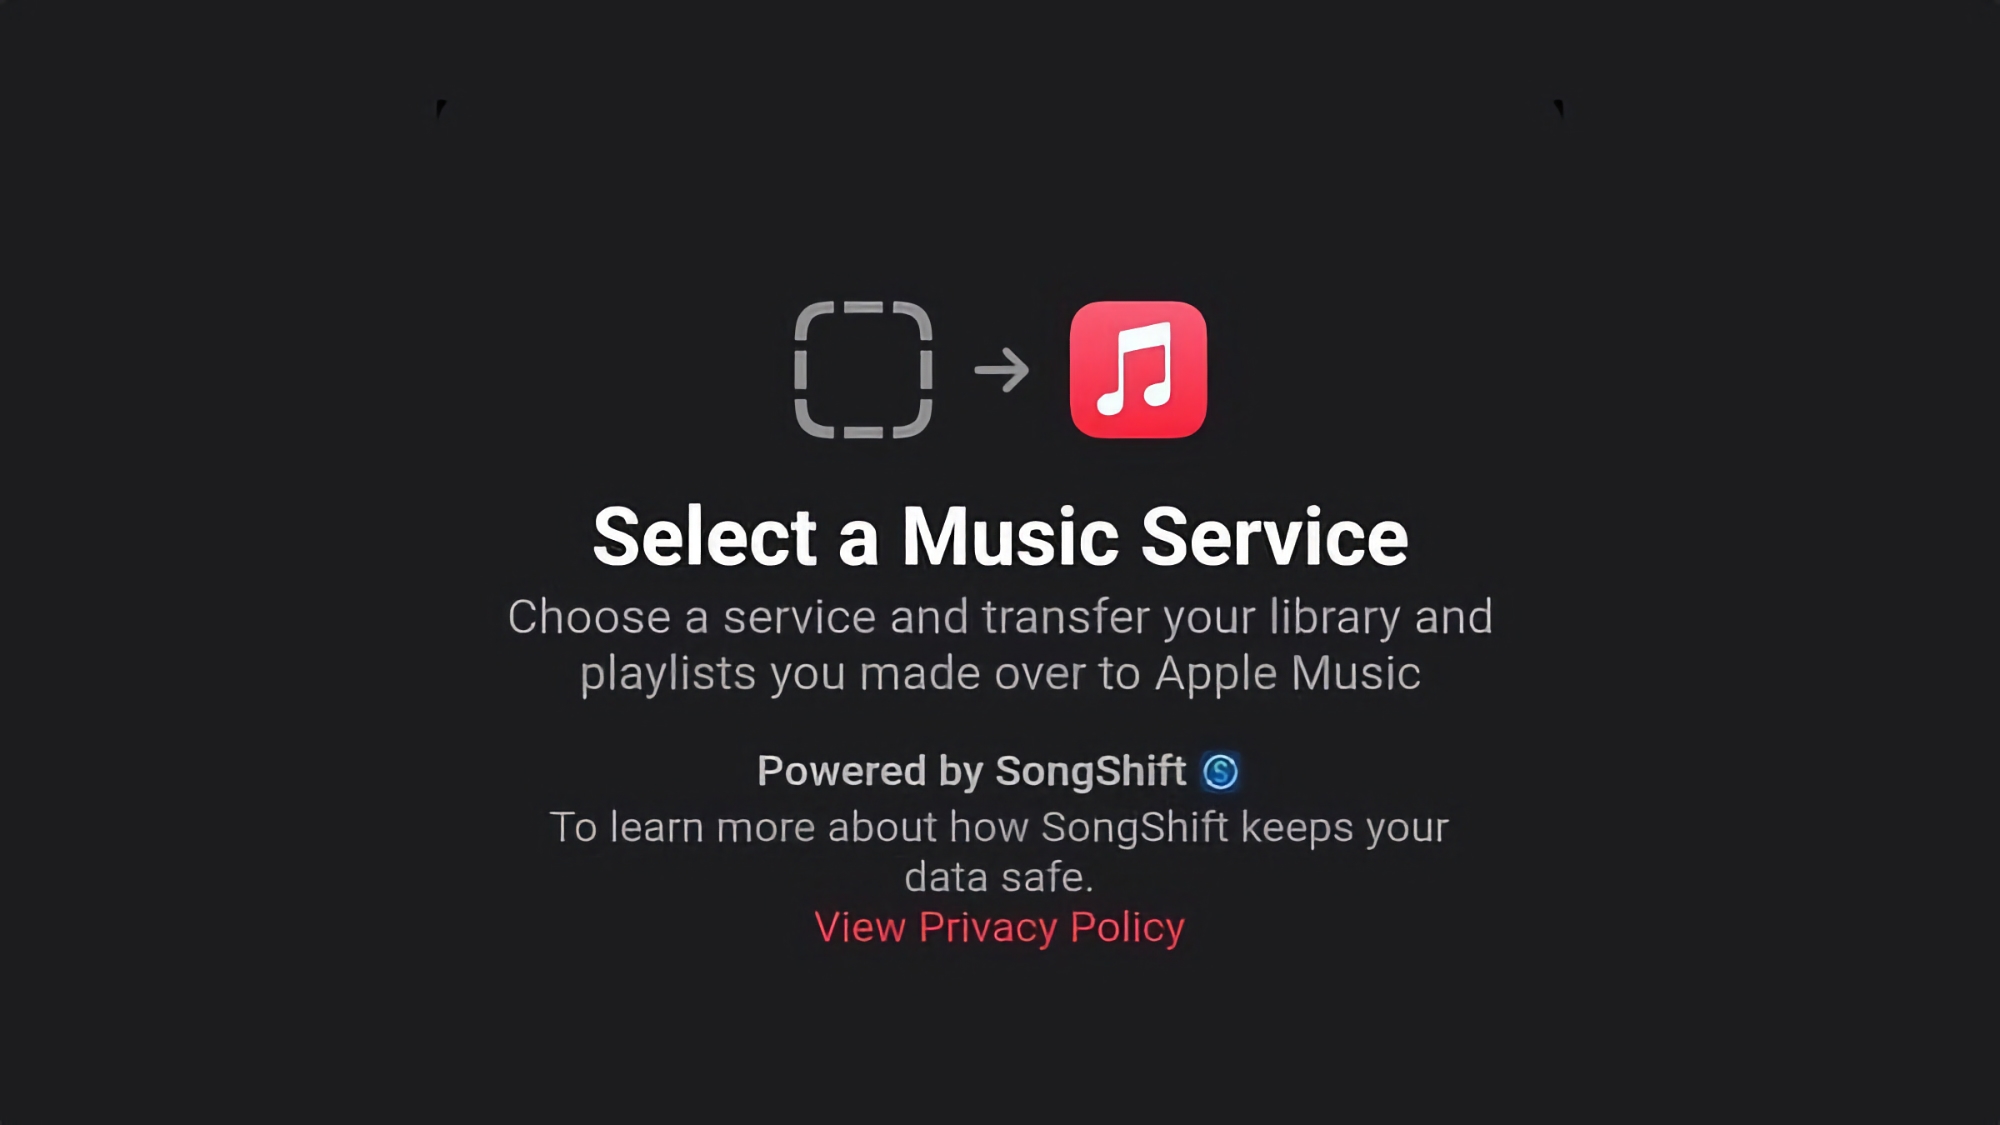 Apple Music will have a feature that will allow you to transfer your song library from other services